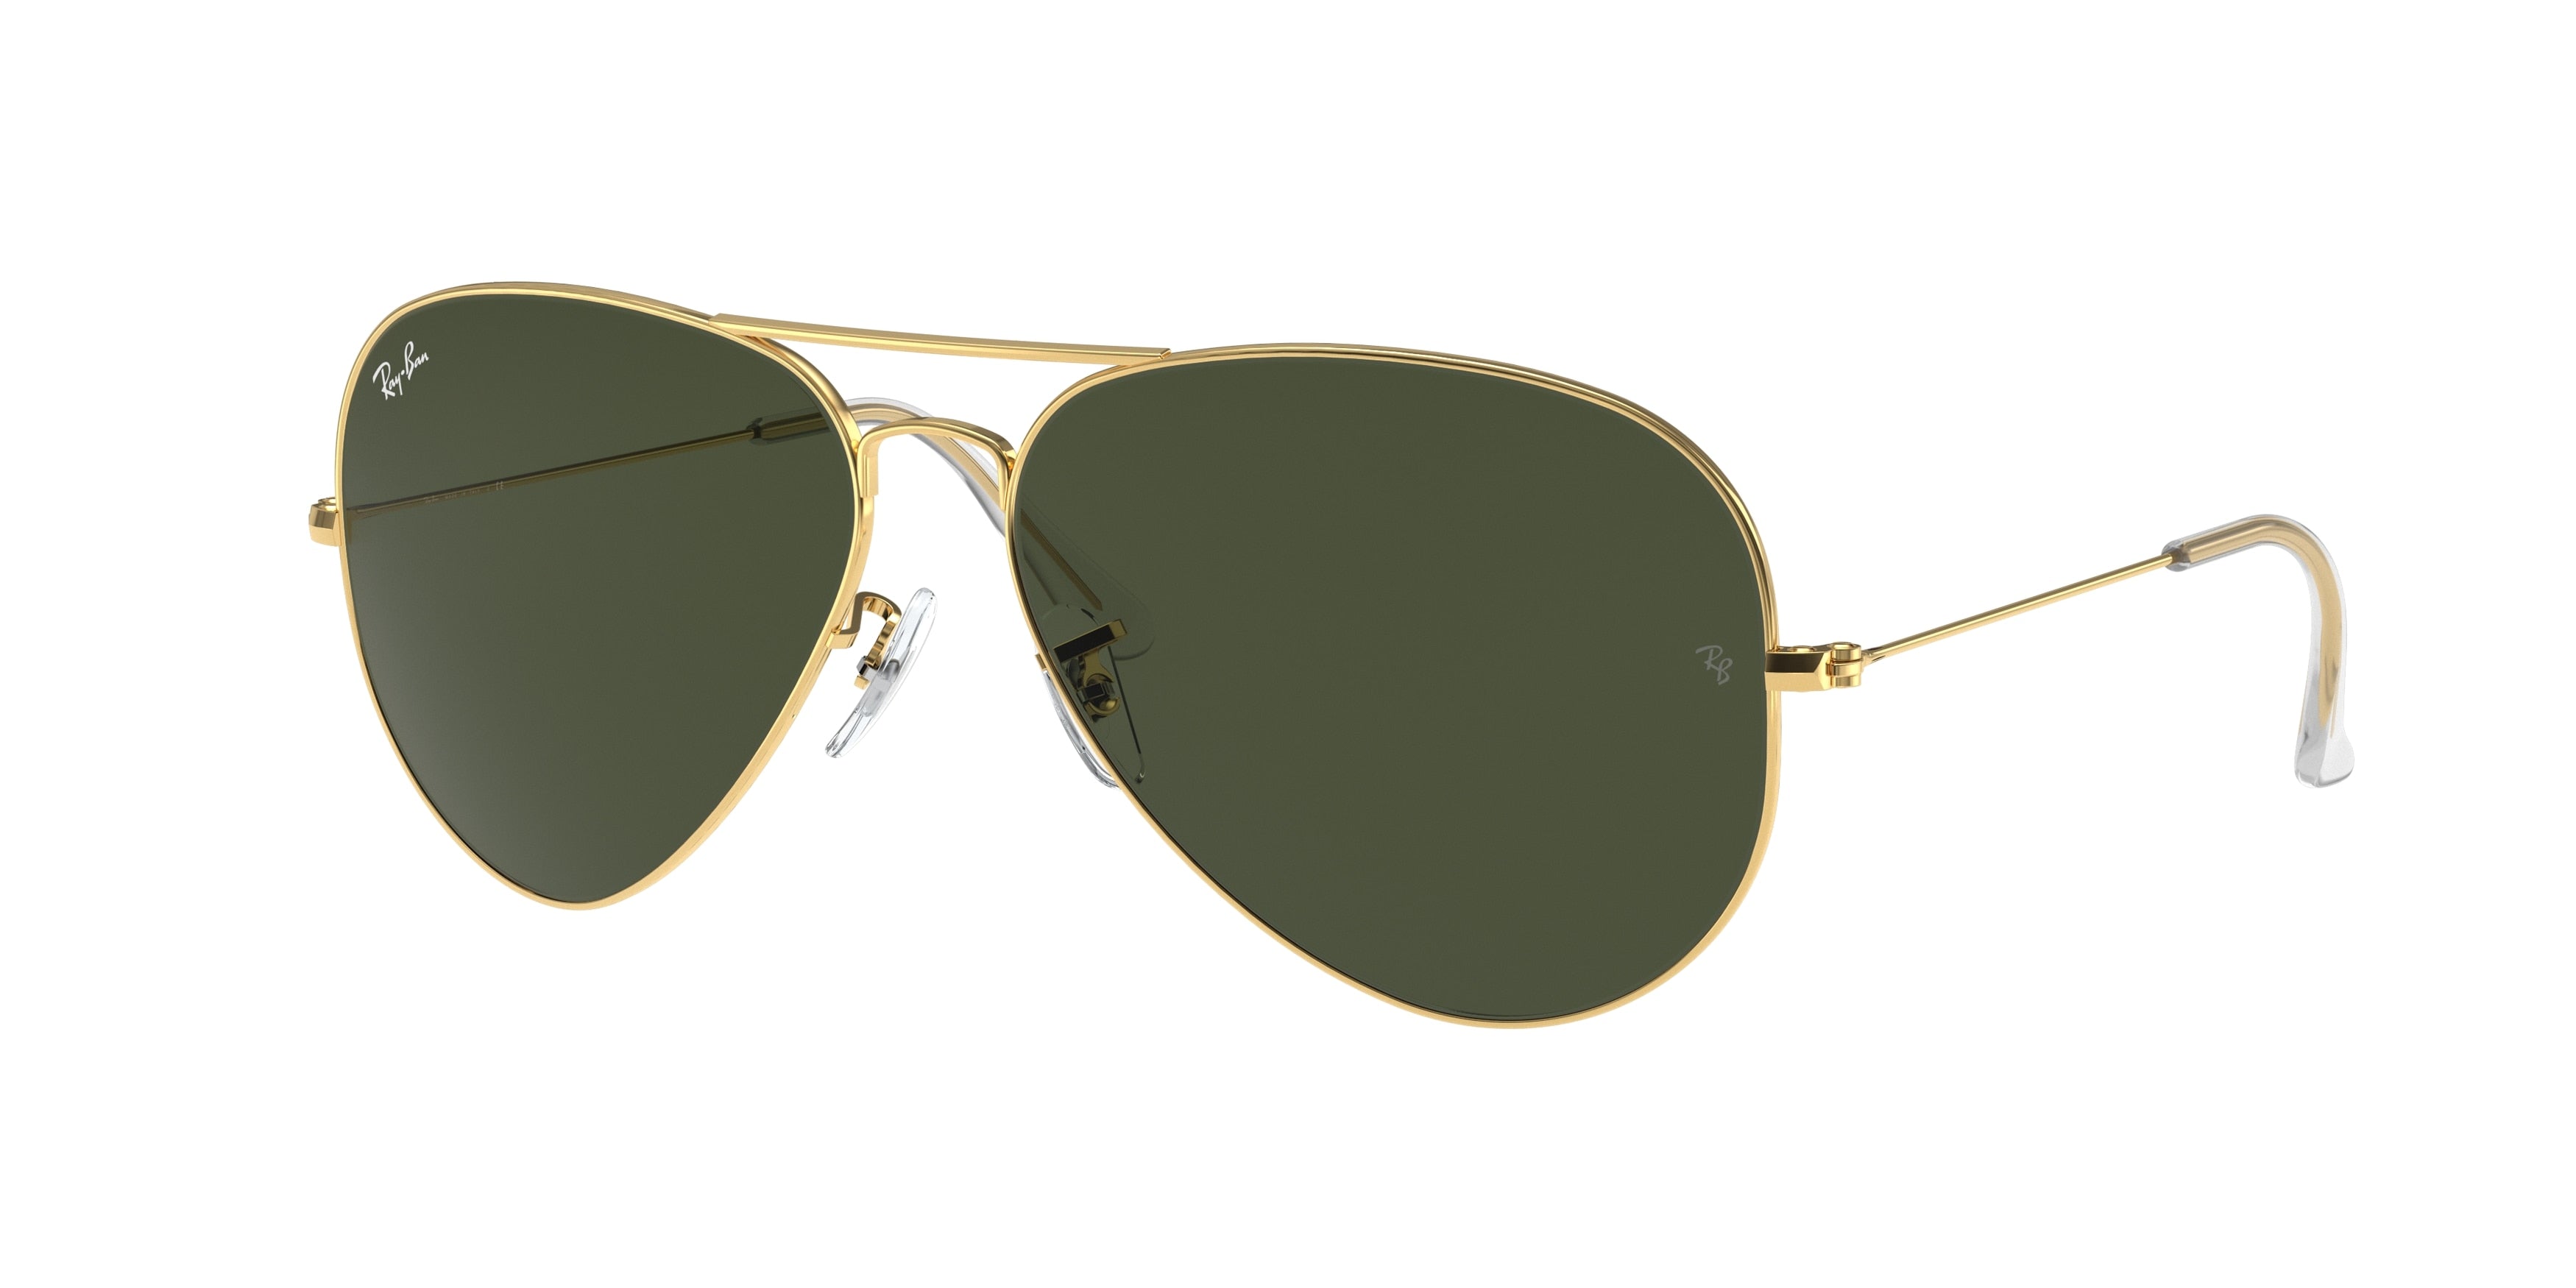 Ray-Ban AVIATOR LARGE METAL II RB3026 Pilot Sunglasses  L2846-Gold 61-140-14 - Color Map Gold